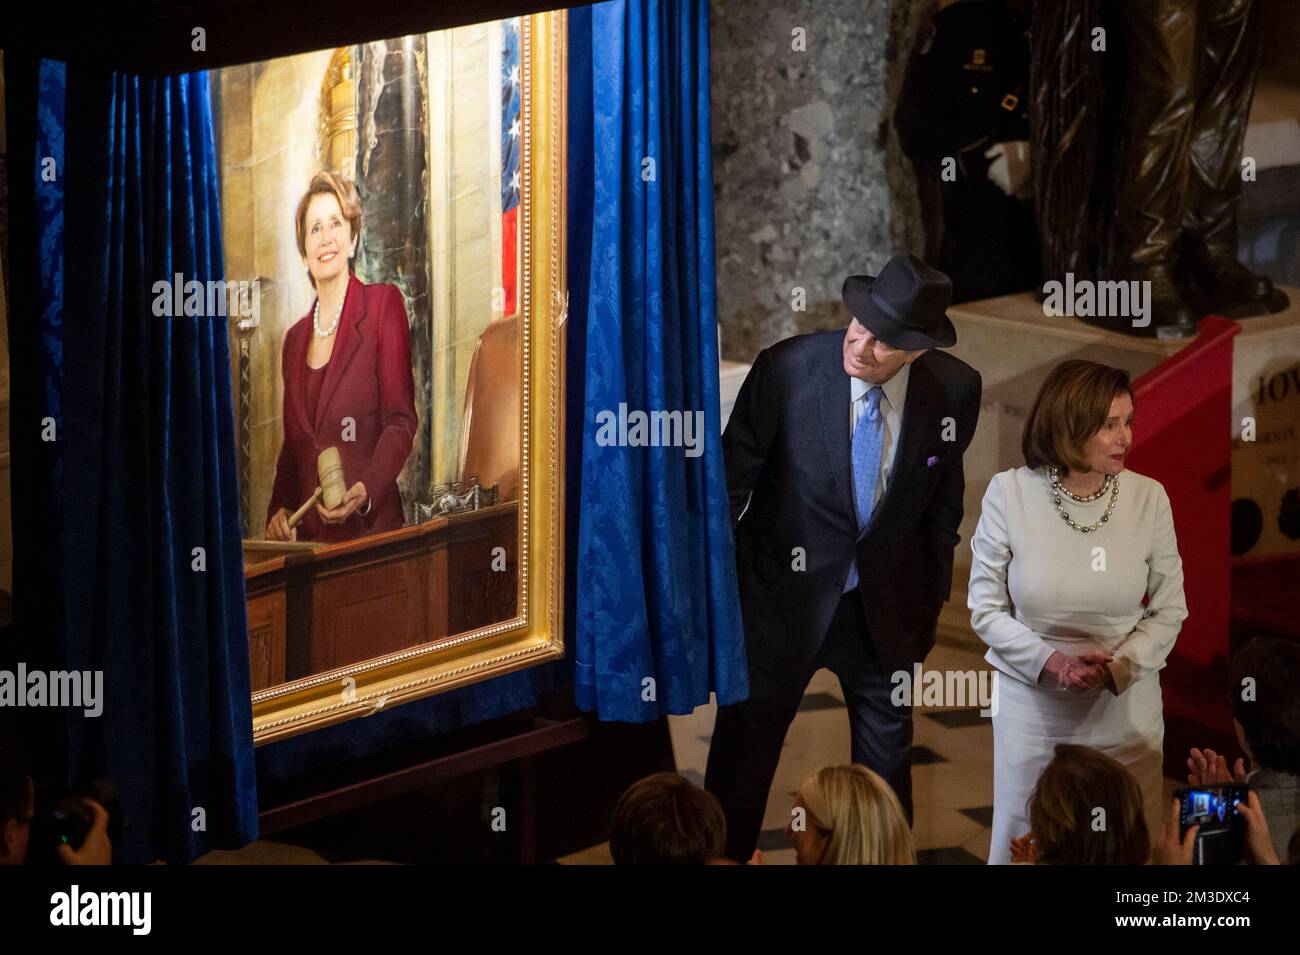 Washington, Vereinigte Staaten. 14th Dec, 2022. Speaker of the United States House of Representatives Nancy Pelosi (Democrat of California) is joined by her husband Paul Pelosi during a ceremony to unveil her official portrait in Statuary Hall at the US Capitol in Washington, DC, Wednesday, December 14, 2022. Credit: Rod Lamkey/CNP/dpa/Alamy Live News Stock Photo